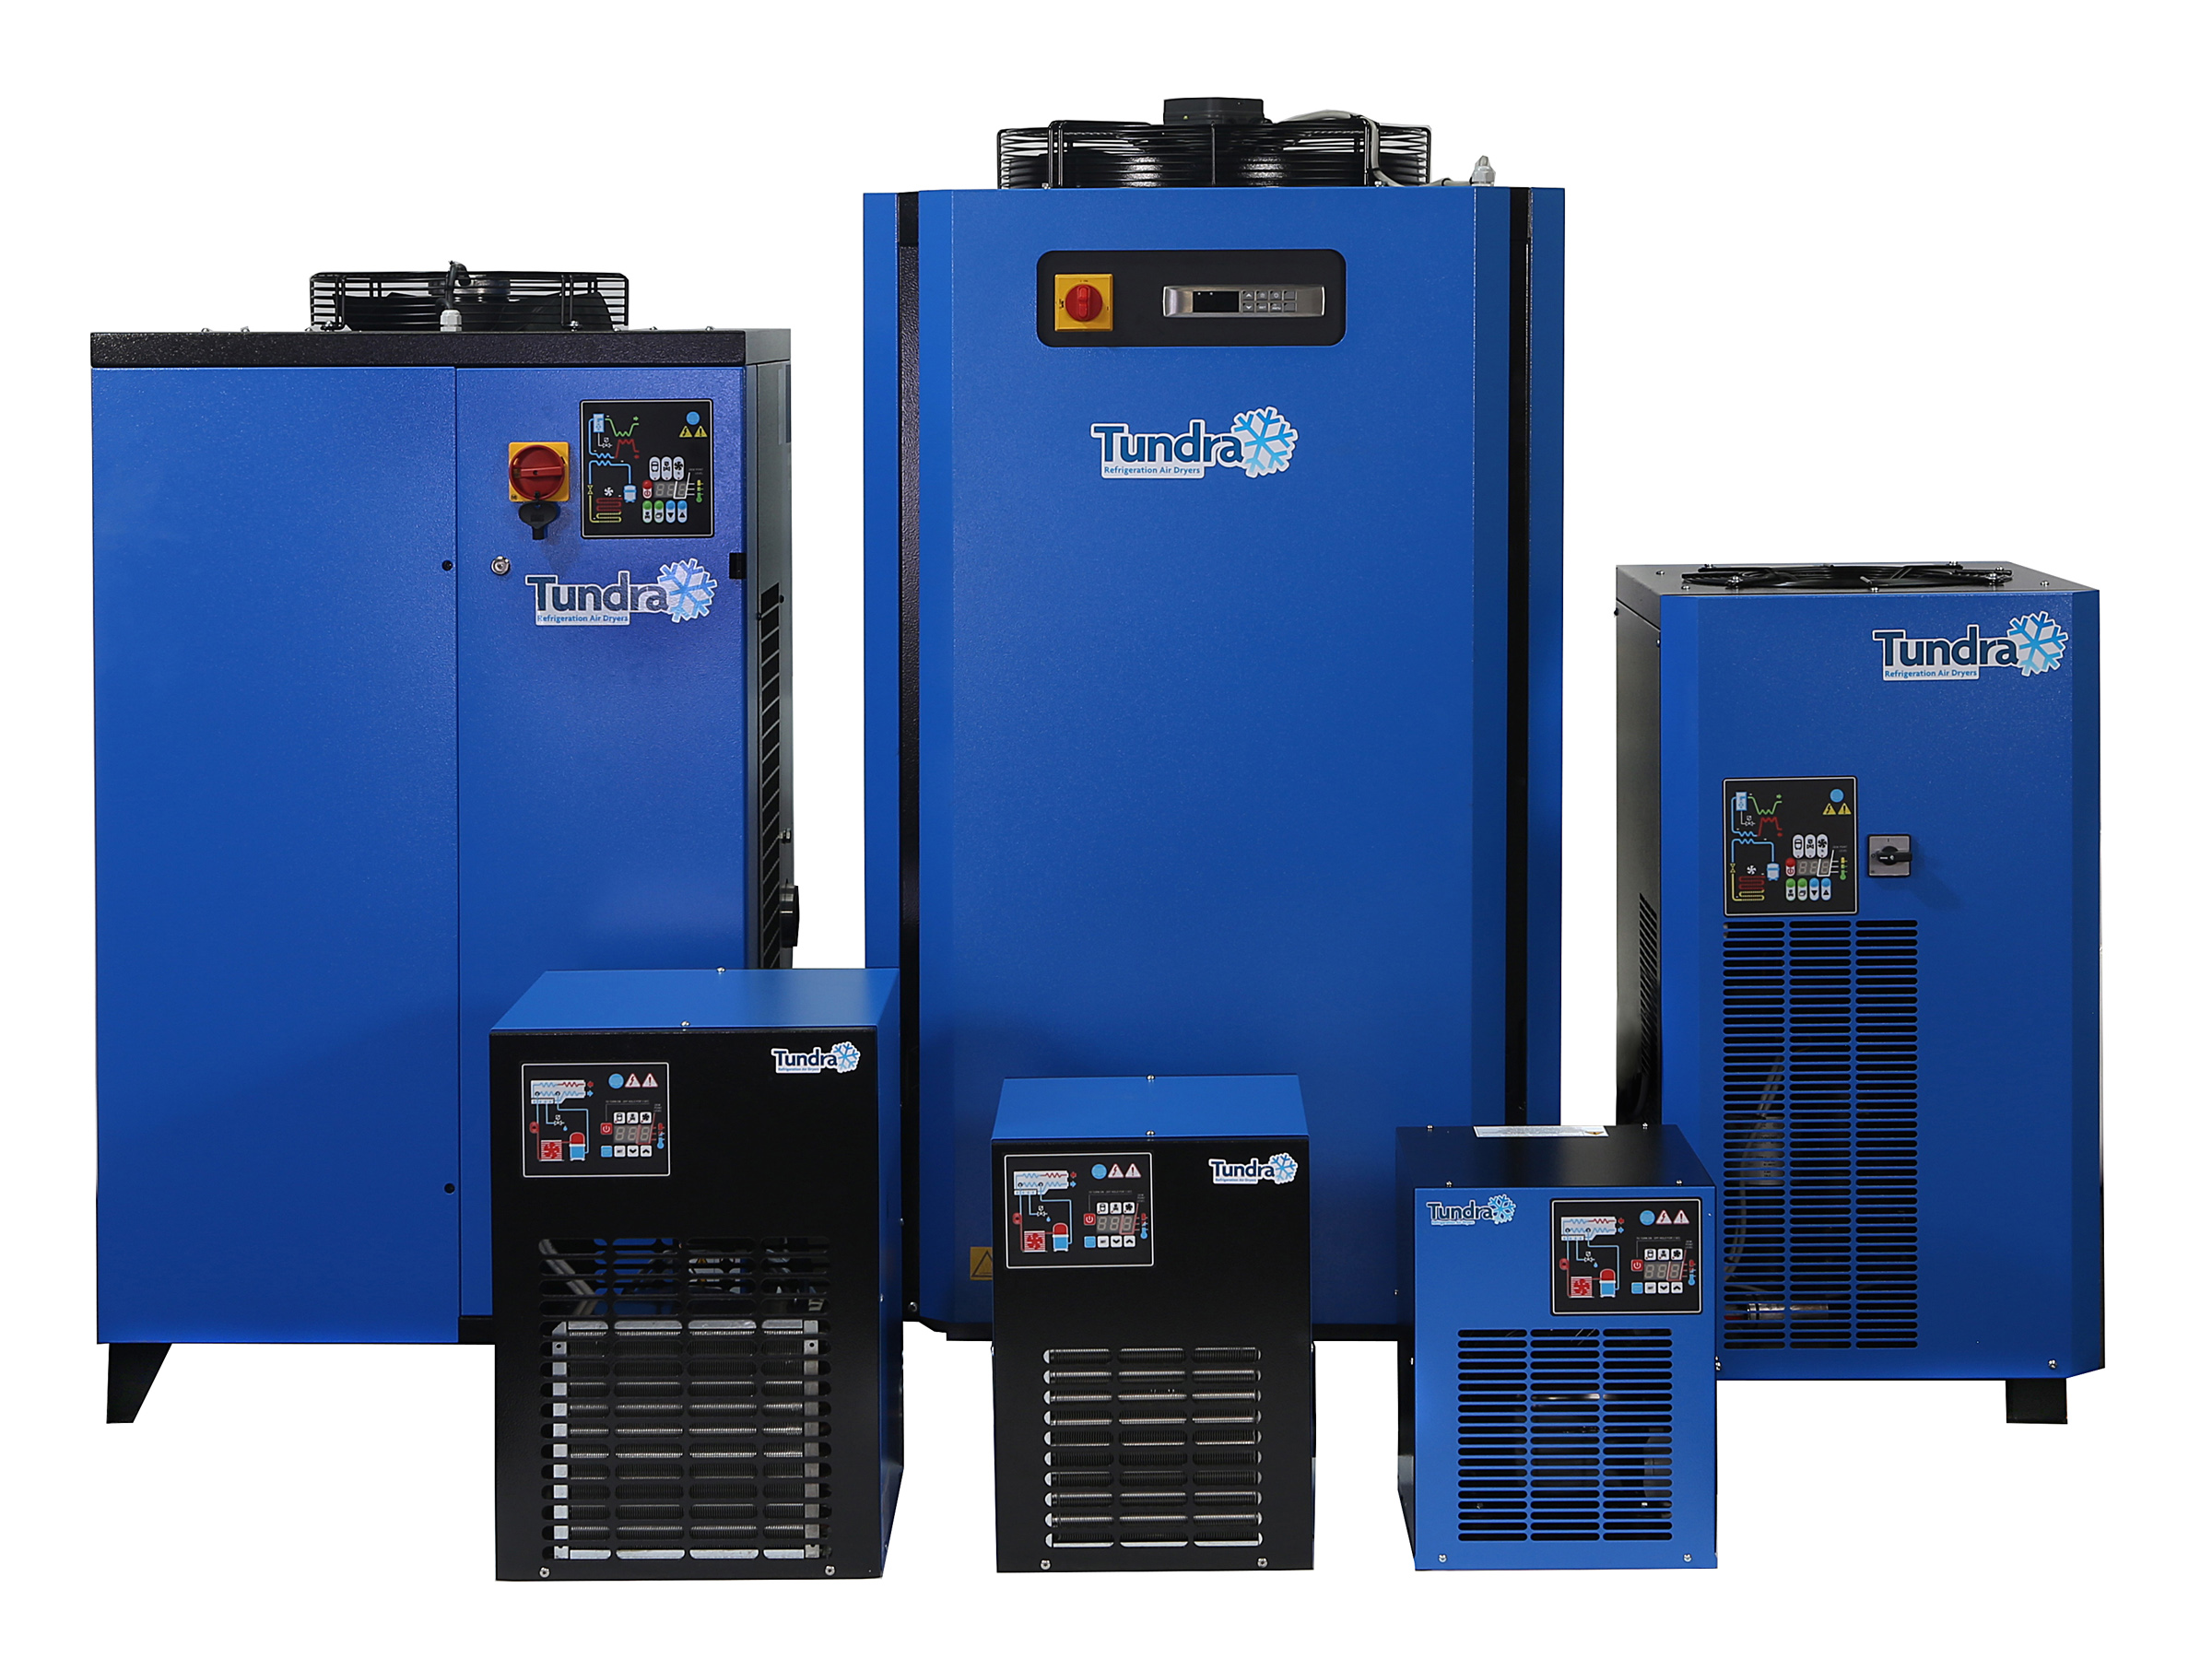 The latest Hi-line Tundra refrigeration dryers contain R513a, an A1 safety group refrigerant which is neither toxic nor combustible.